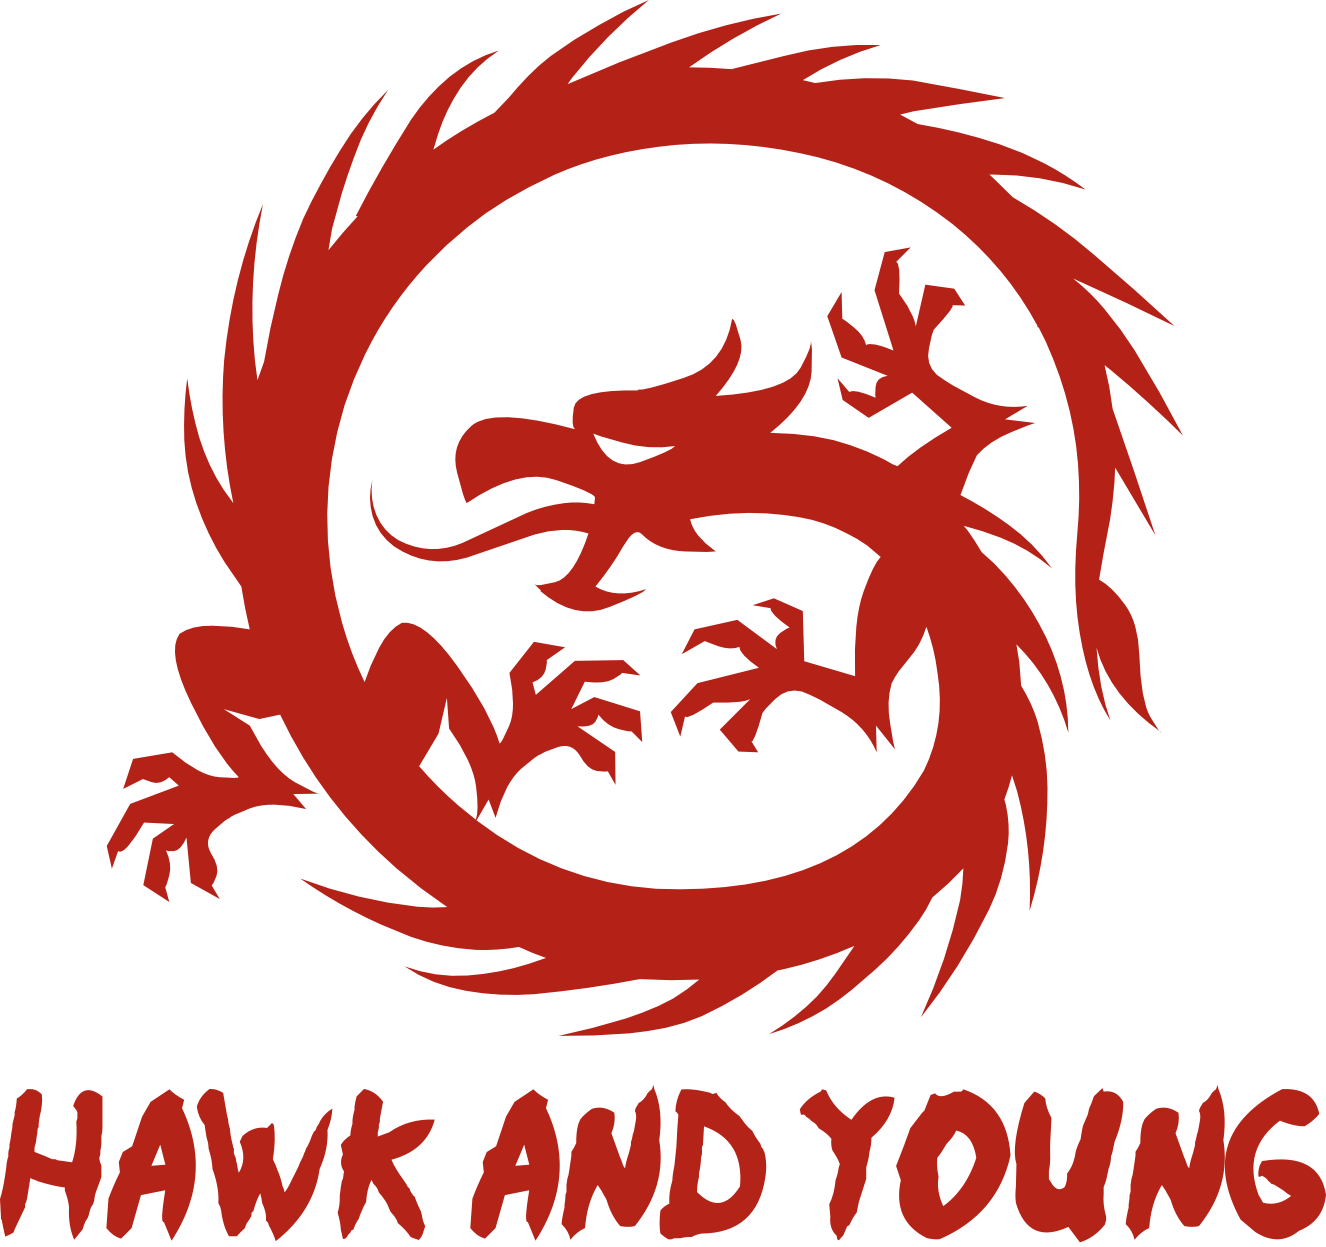 Hawk and Young